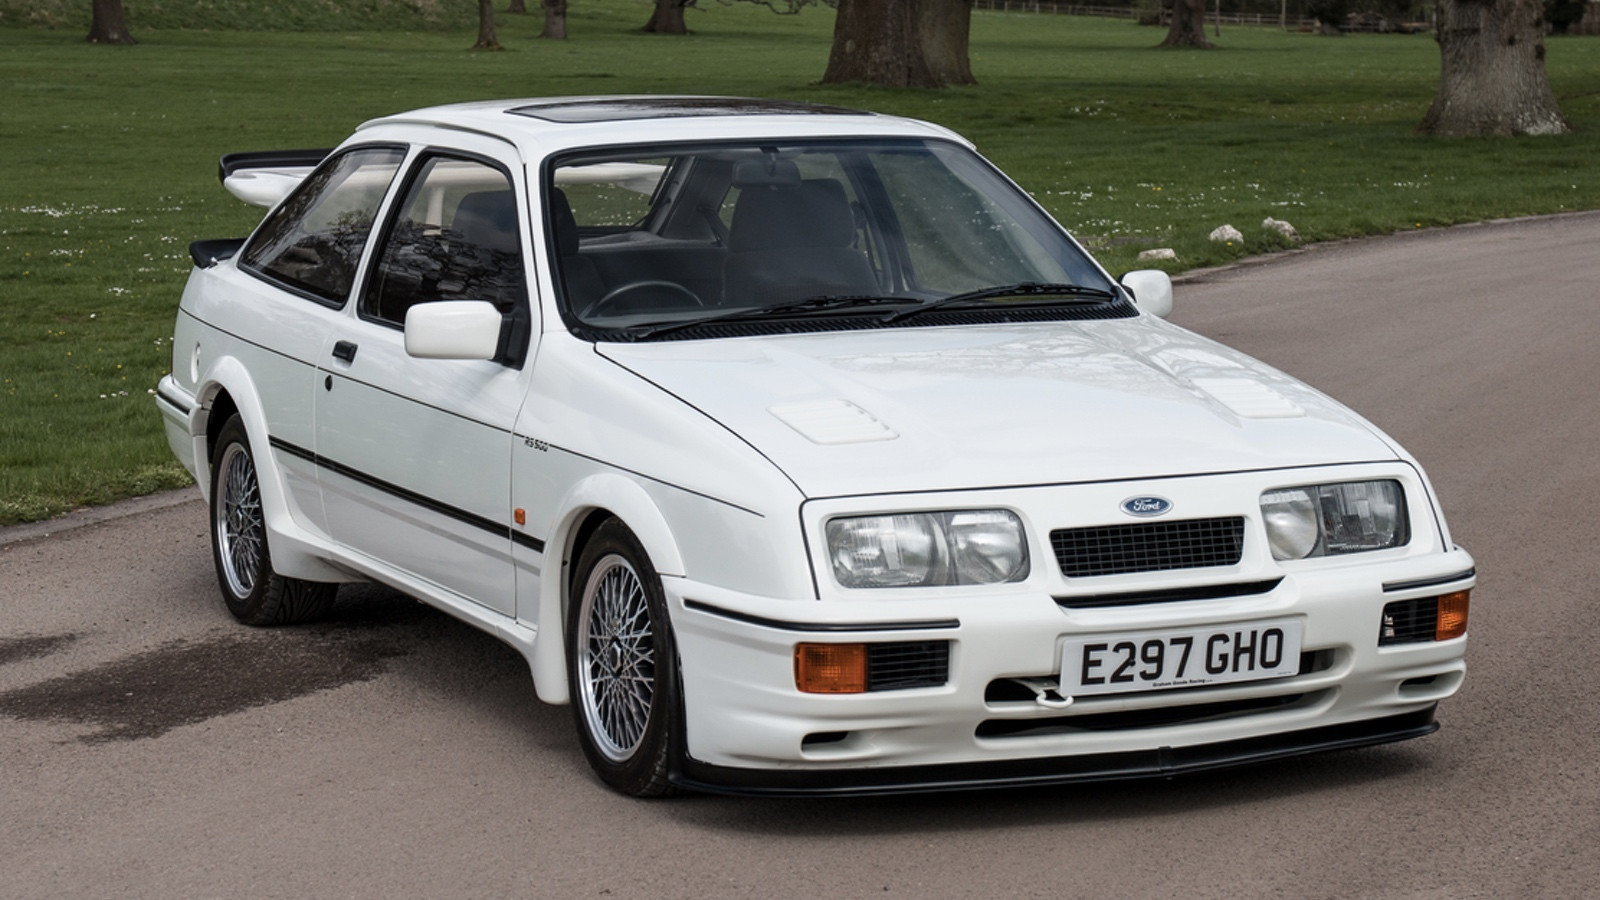 Four fabulous fast Fords aim for auction record